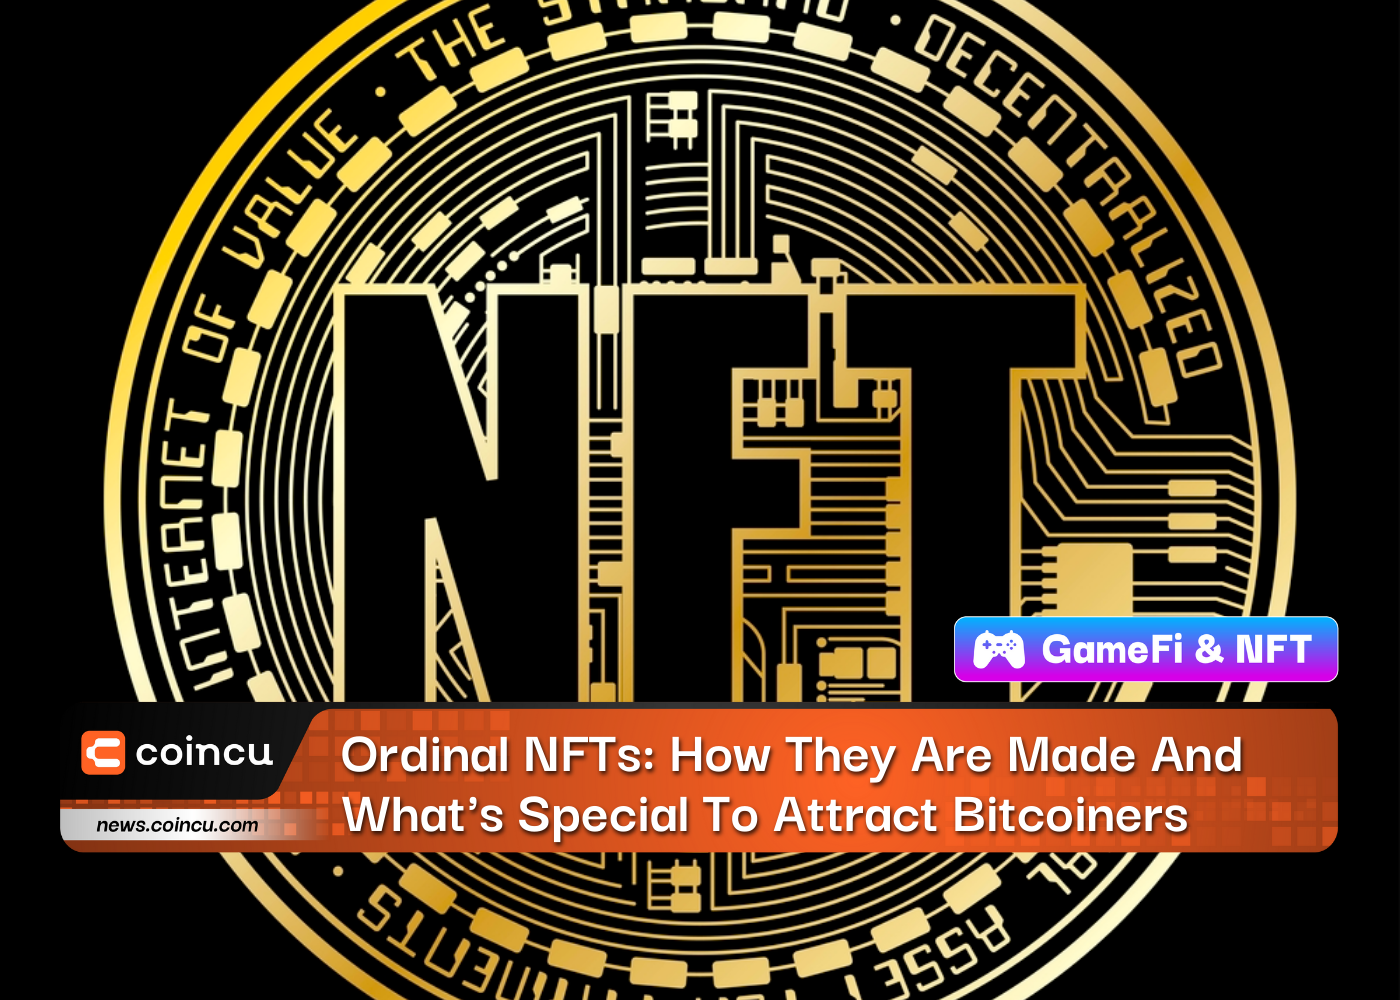 Ordinal NFTs: How They Are Made And What's Special To Attract Bitcoiners